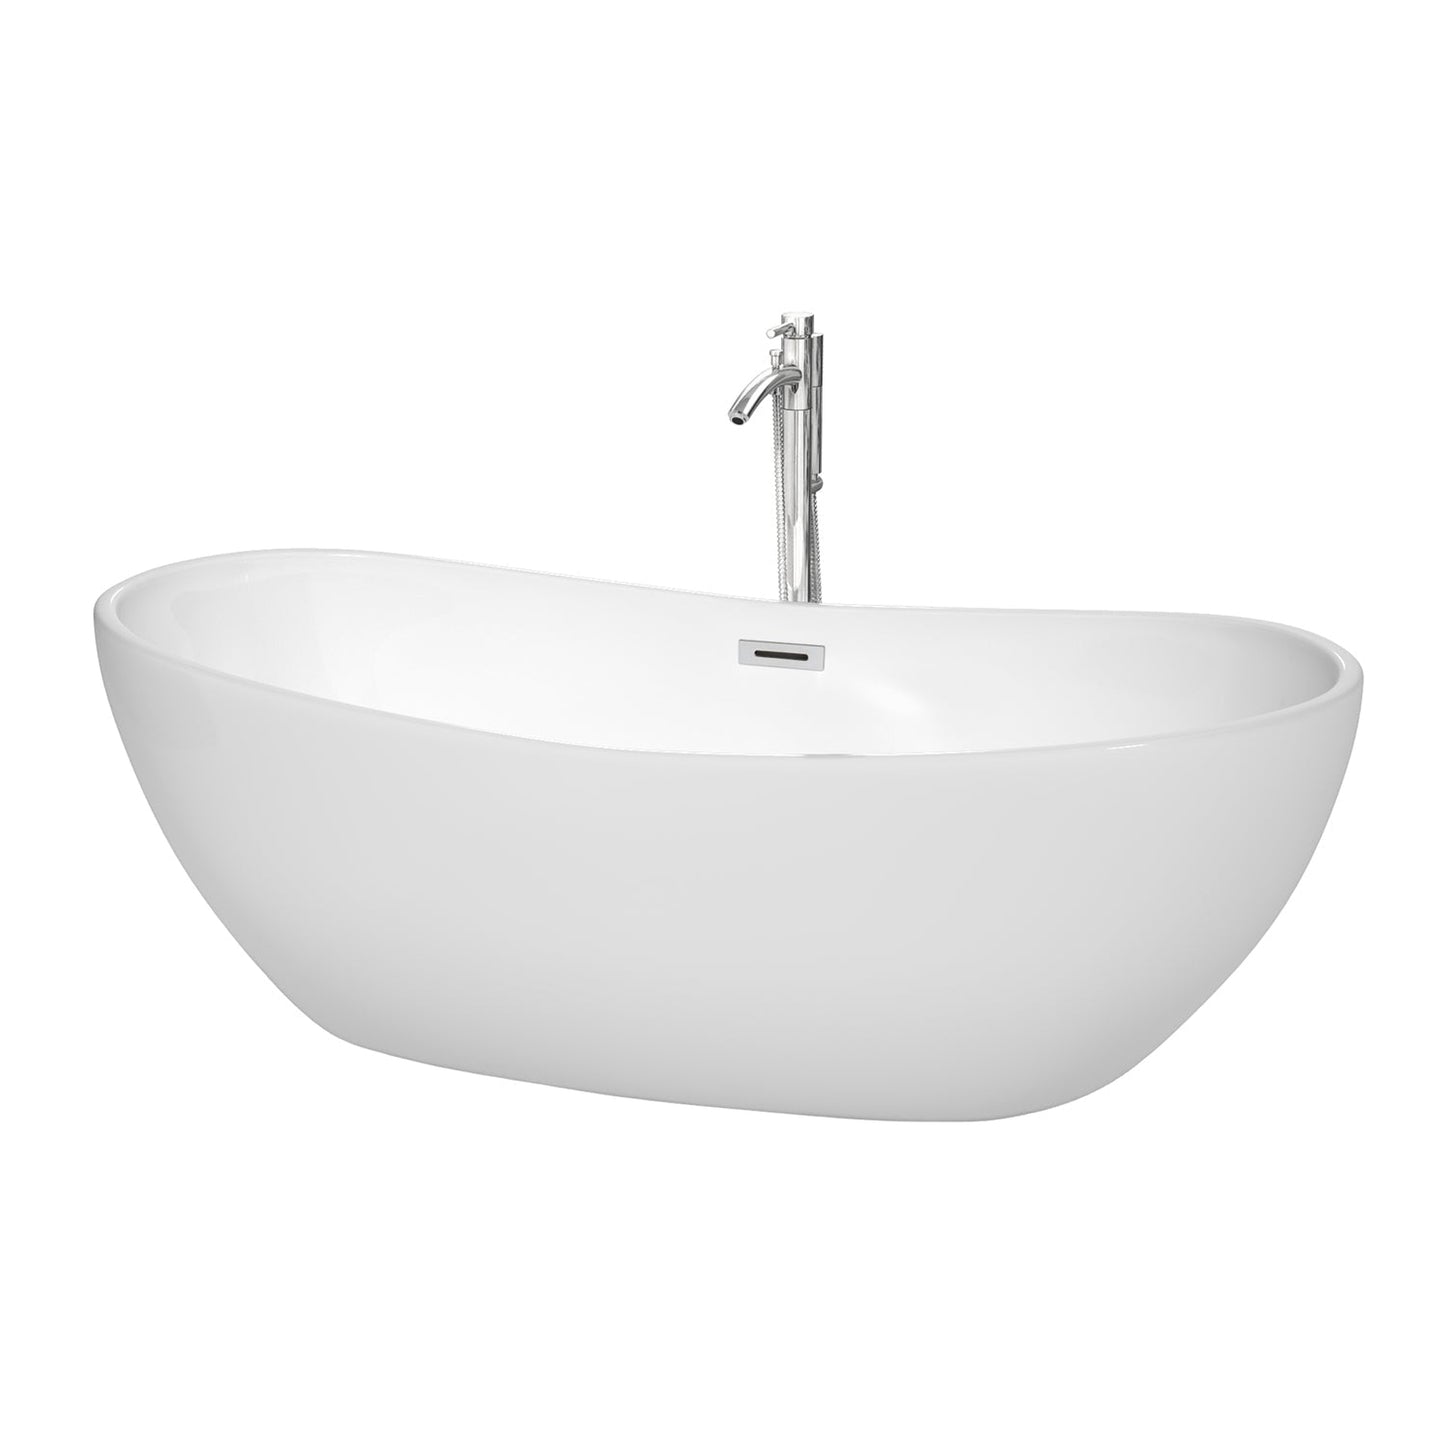 Wyndham Collection Rebecca 70" Freestanding Bathtub in White With Floor Mounted Faucet, Drain and Overflow Trim in Polished Chrome